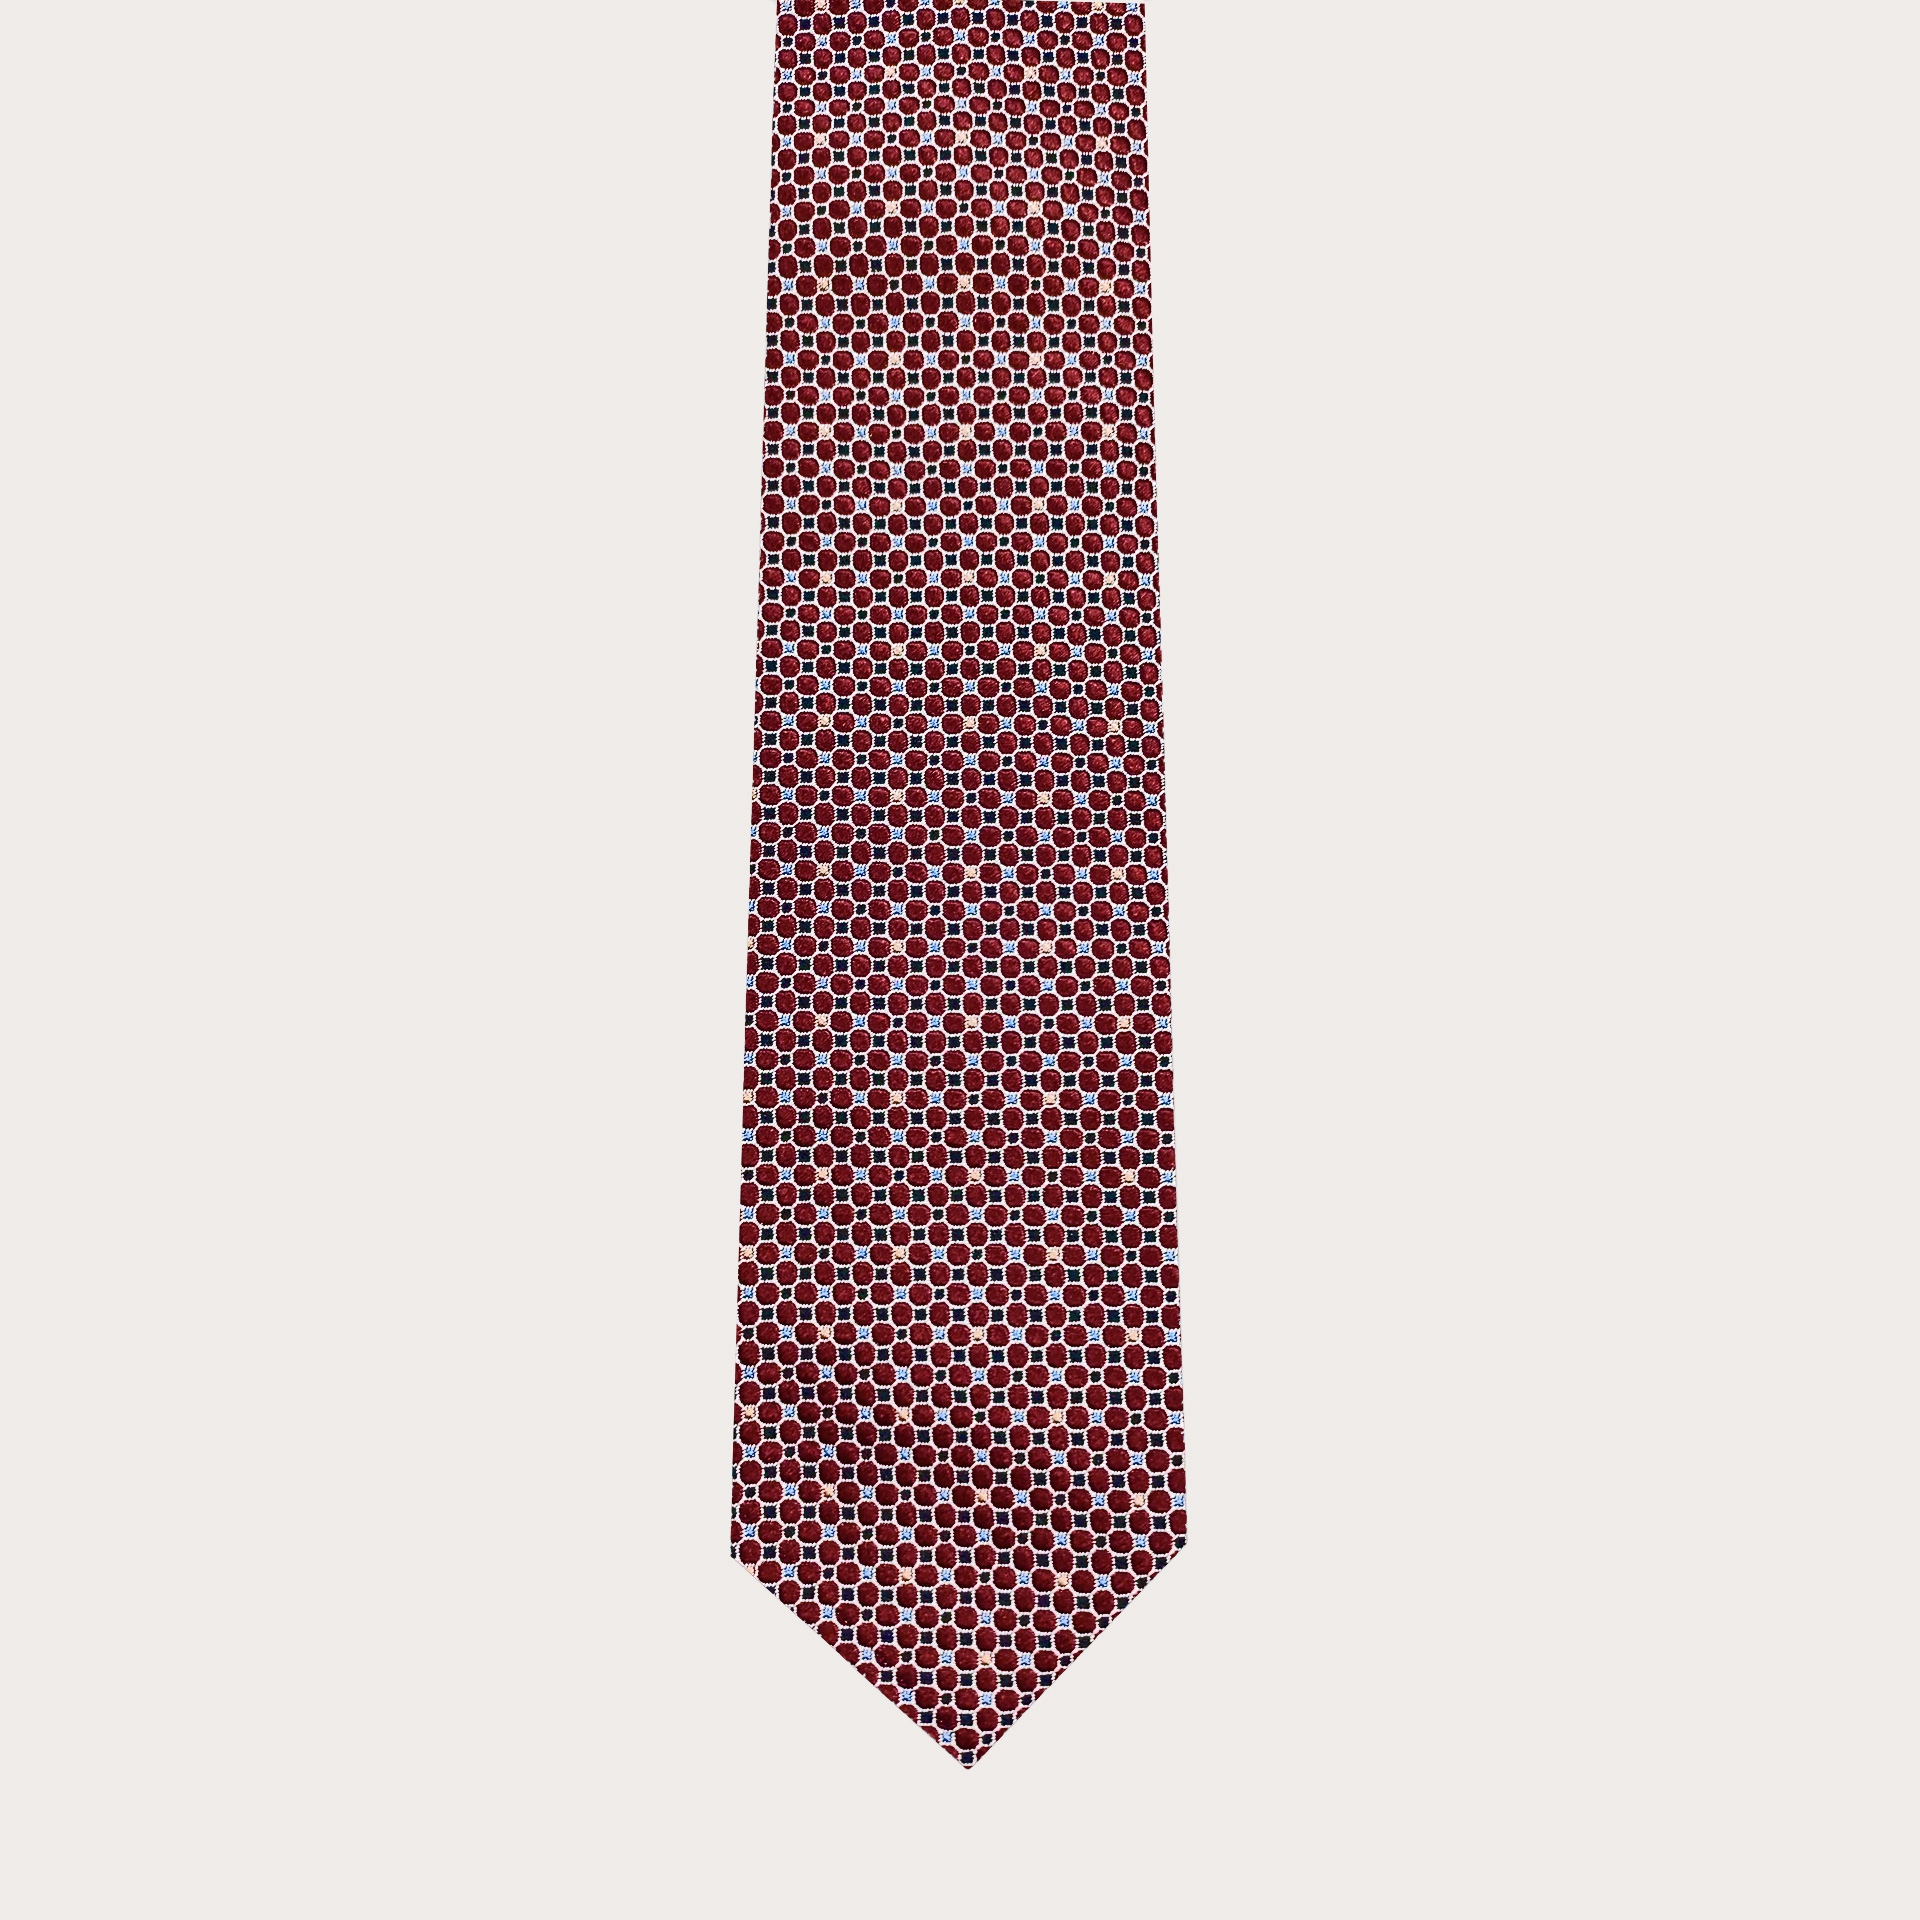 BRUCLE Jacquard silk necktie, burgundy pattern with blue accents